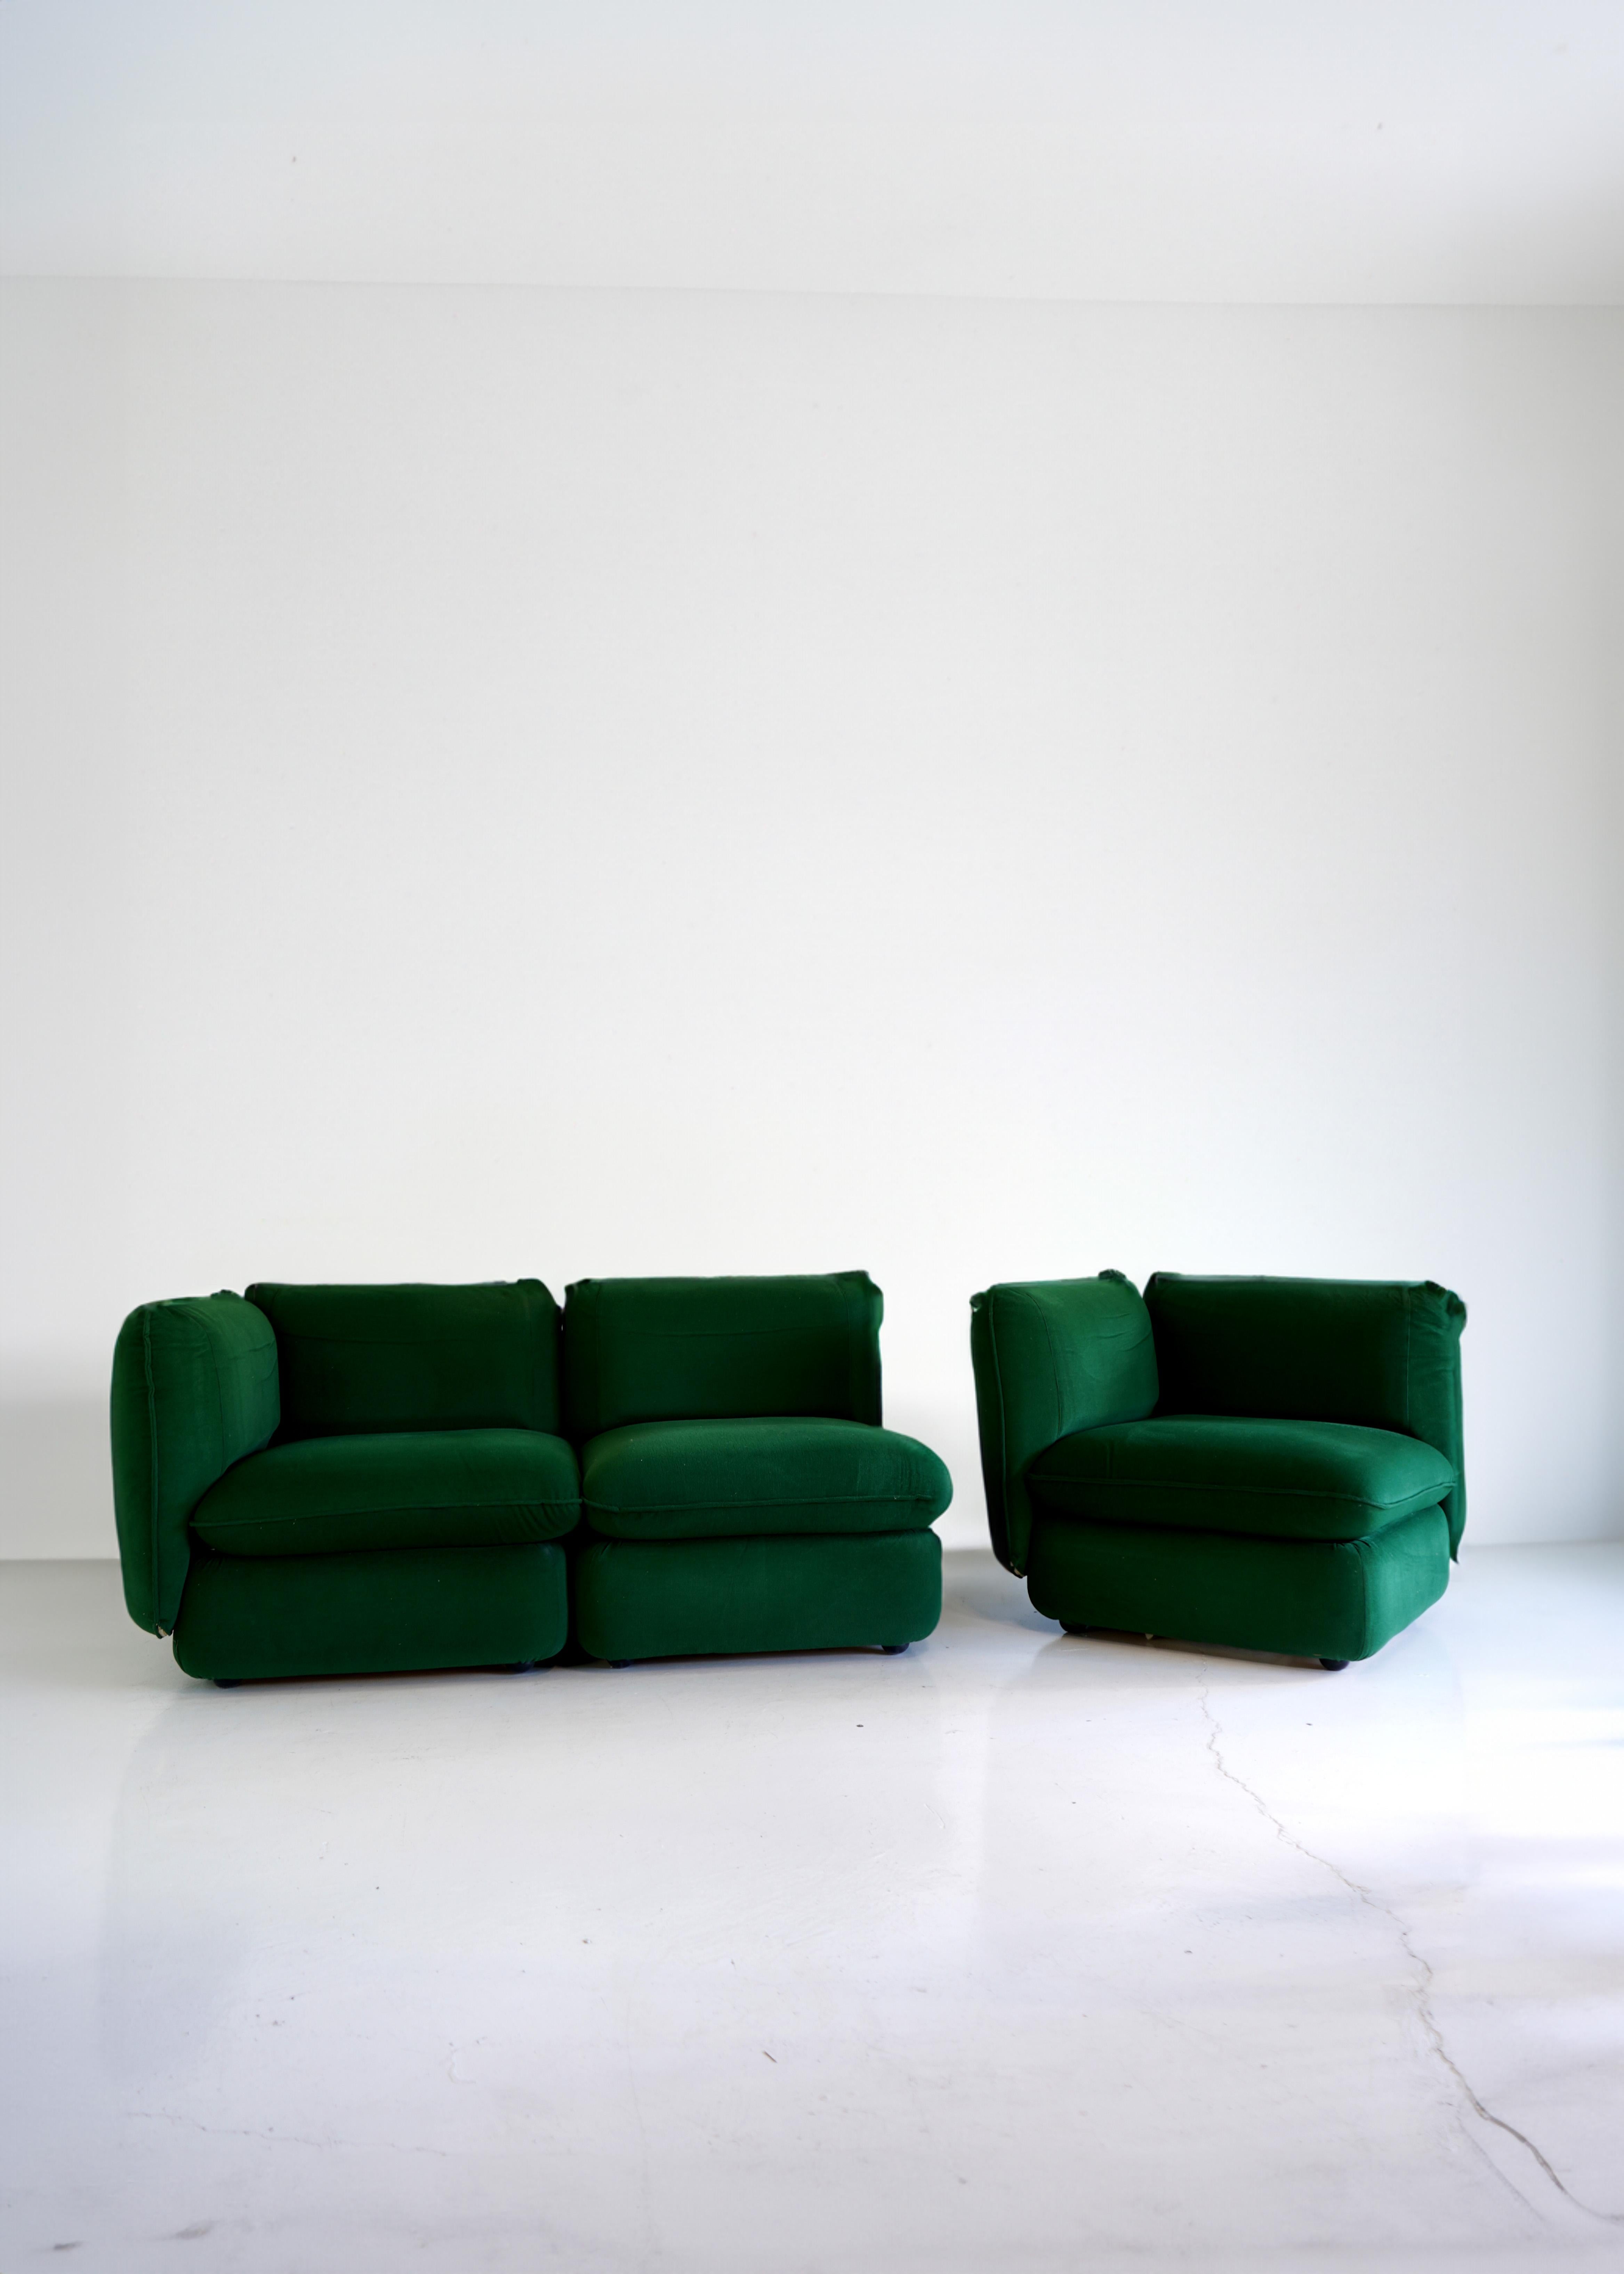 Perfect proportions on this beautiful and rare modular design from IPE Cavalli in a gorgeous, deep emerald green, chenille. Subtle silhouette and pillowy cushions. Can be set up as multiple chairs by removing armrests from corner pieces. In very